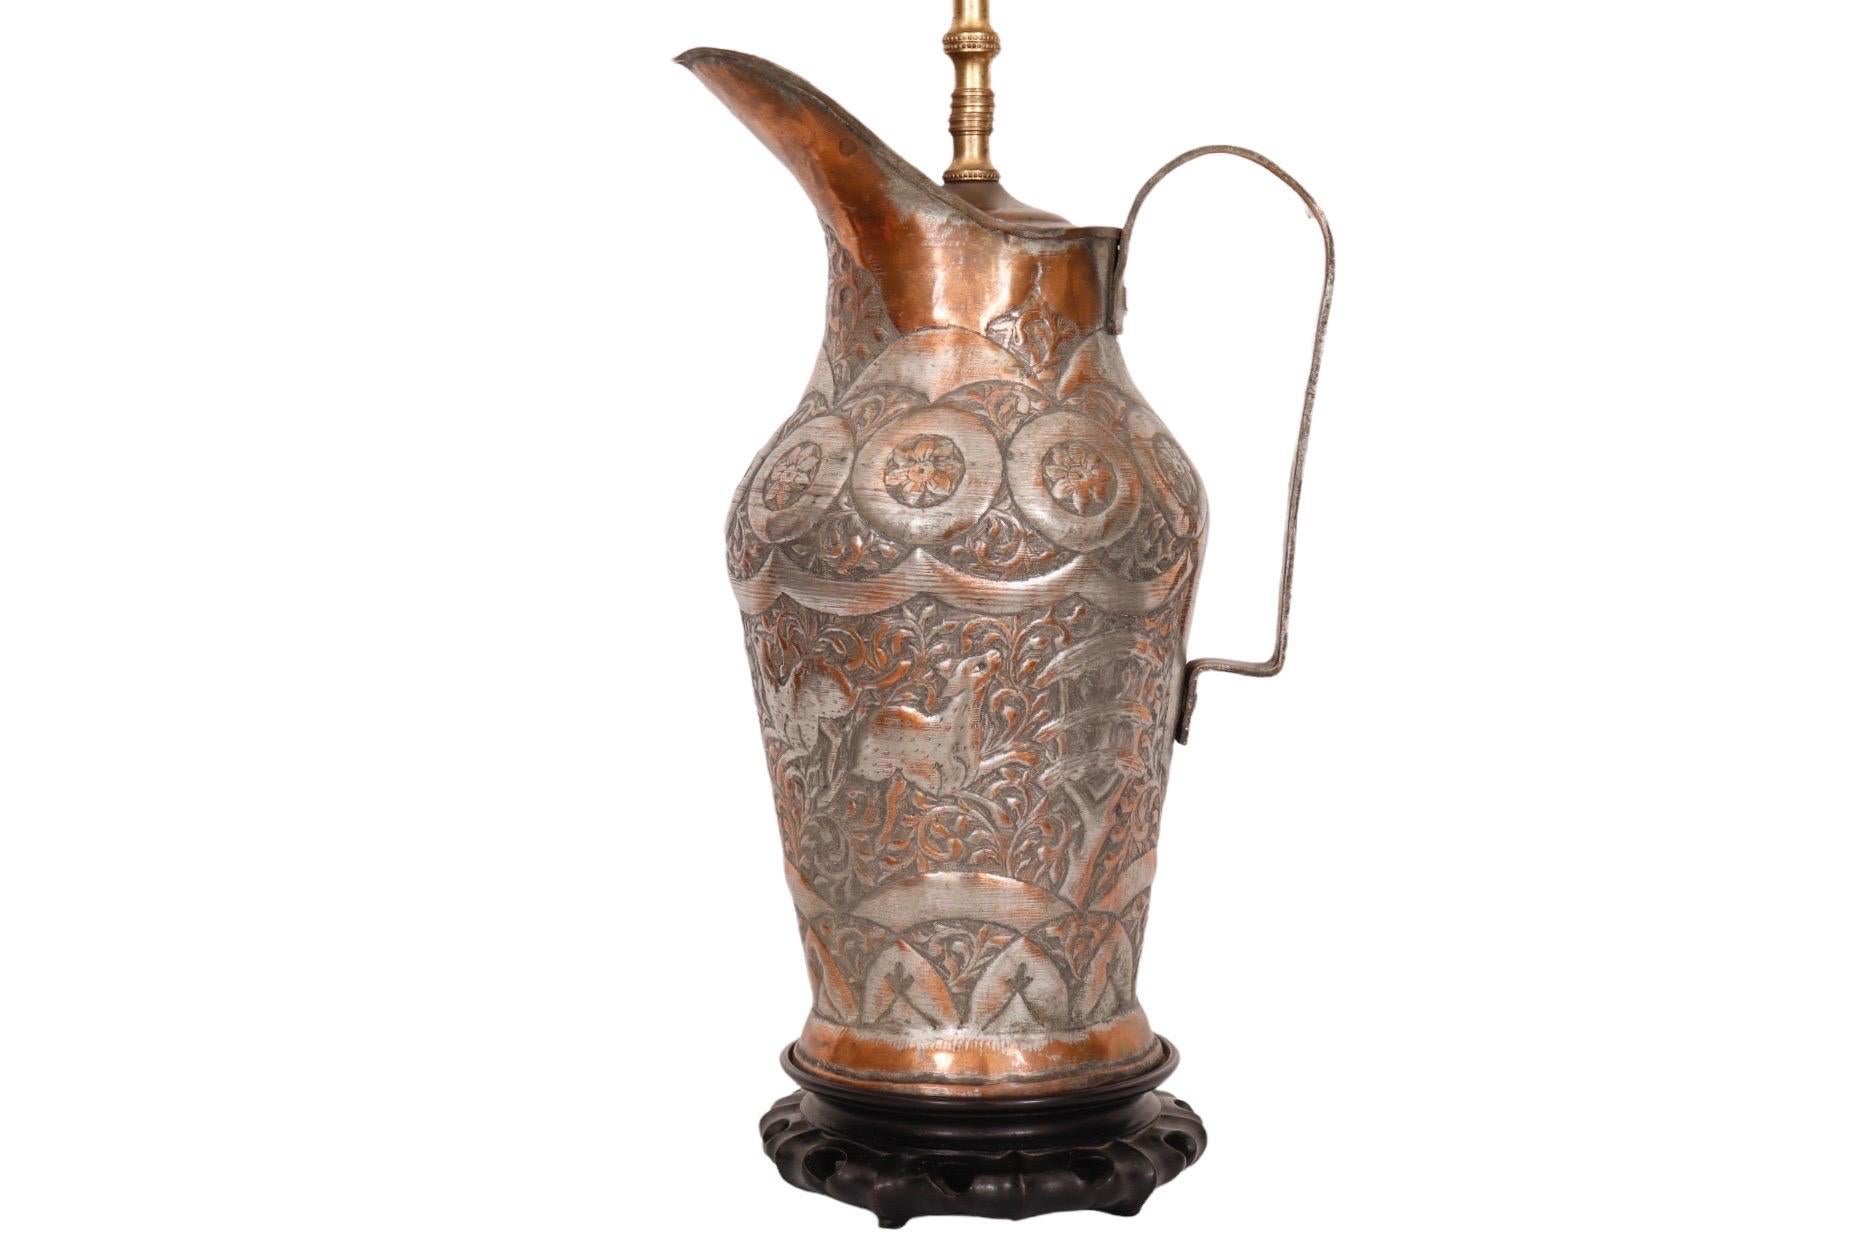 A 19th century Middle Eastern silver over copper and brass water pitcher, converted into a table lamp. The pitcher has a riveted handle and is etched with deer amid vine foliage on the main body, a flower pattern around the neck and a symmetrical